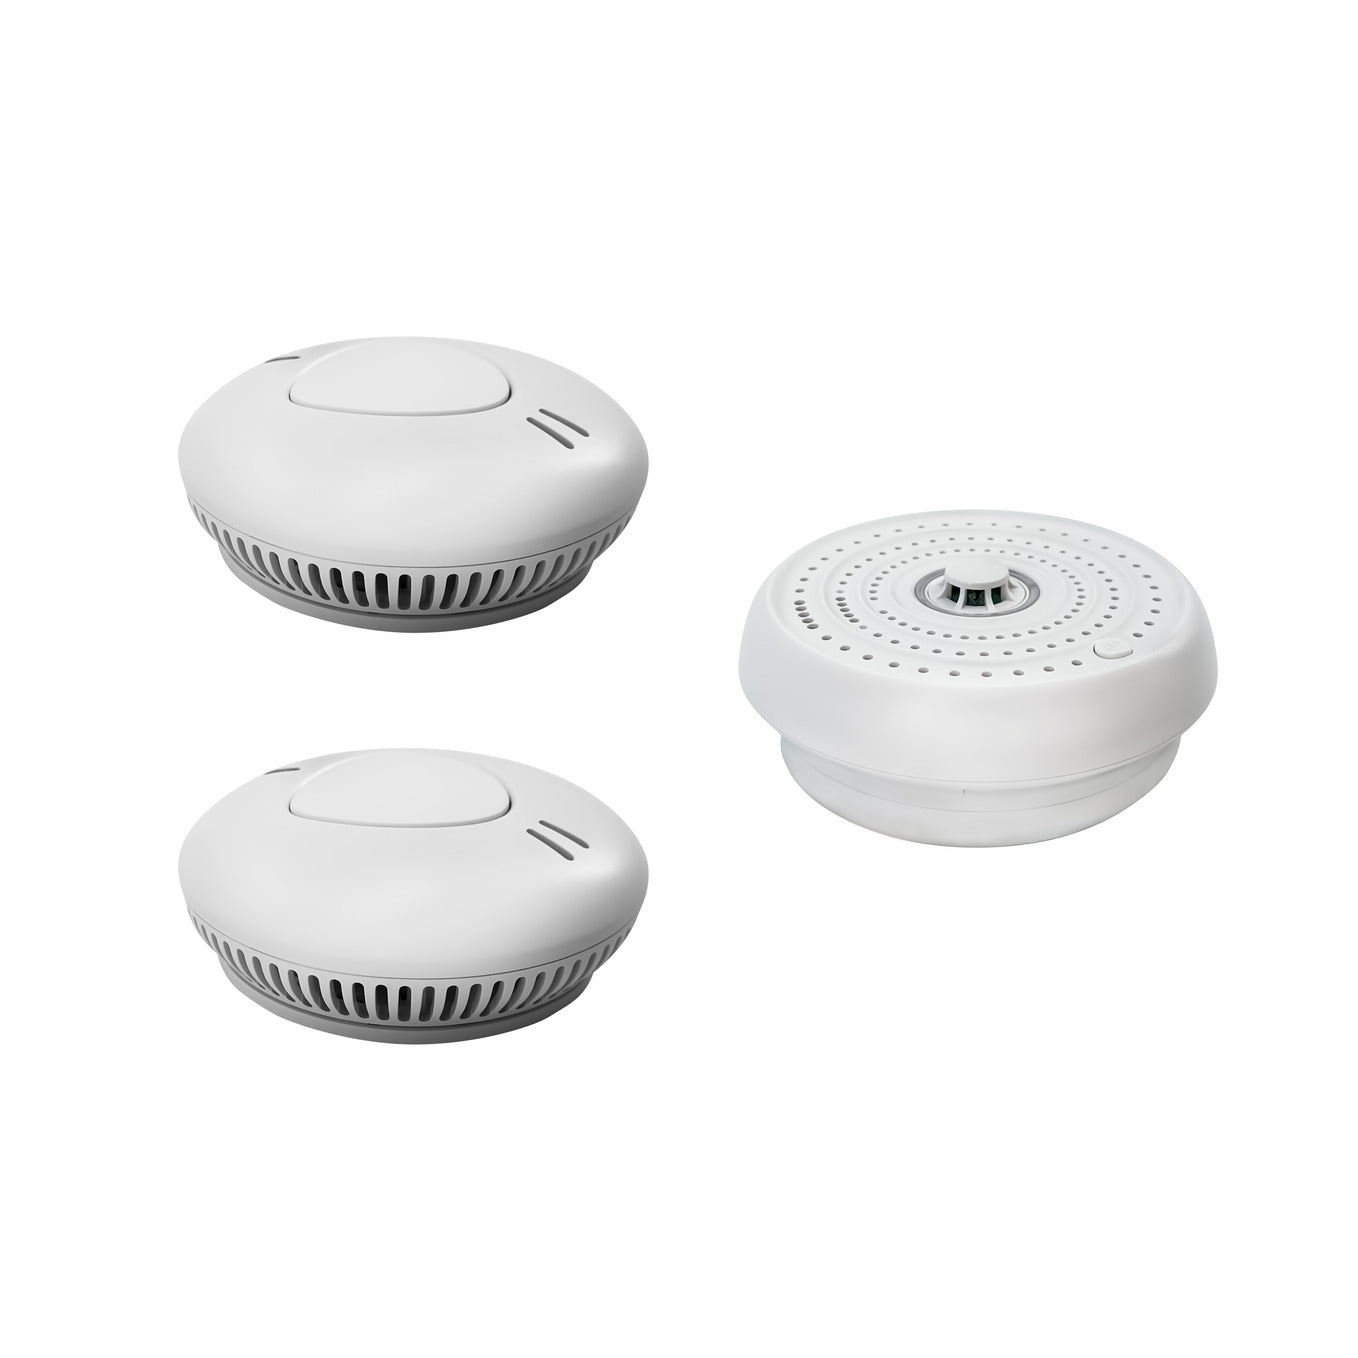 Firexo 3 Unit Interlinked Optical 2x Smoke Alarm and 1xHeat Alarm bundle all with 10 Year Tamper Proof Battery, White. Contains 2x Smoke Alarm, 1x Heat Alarm